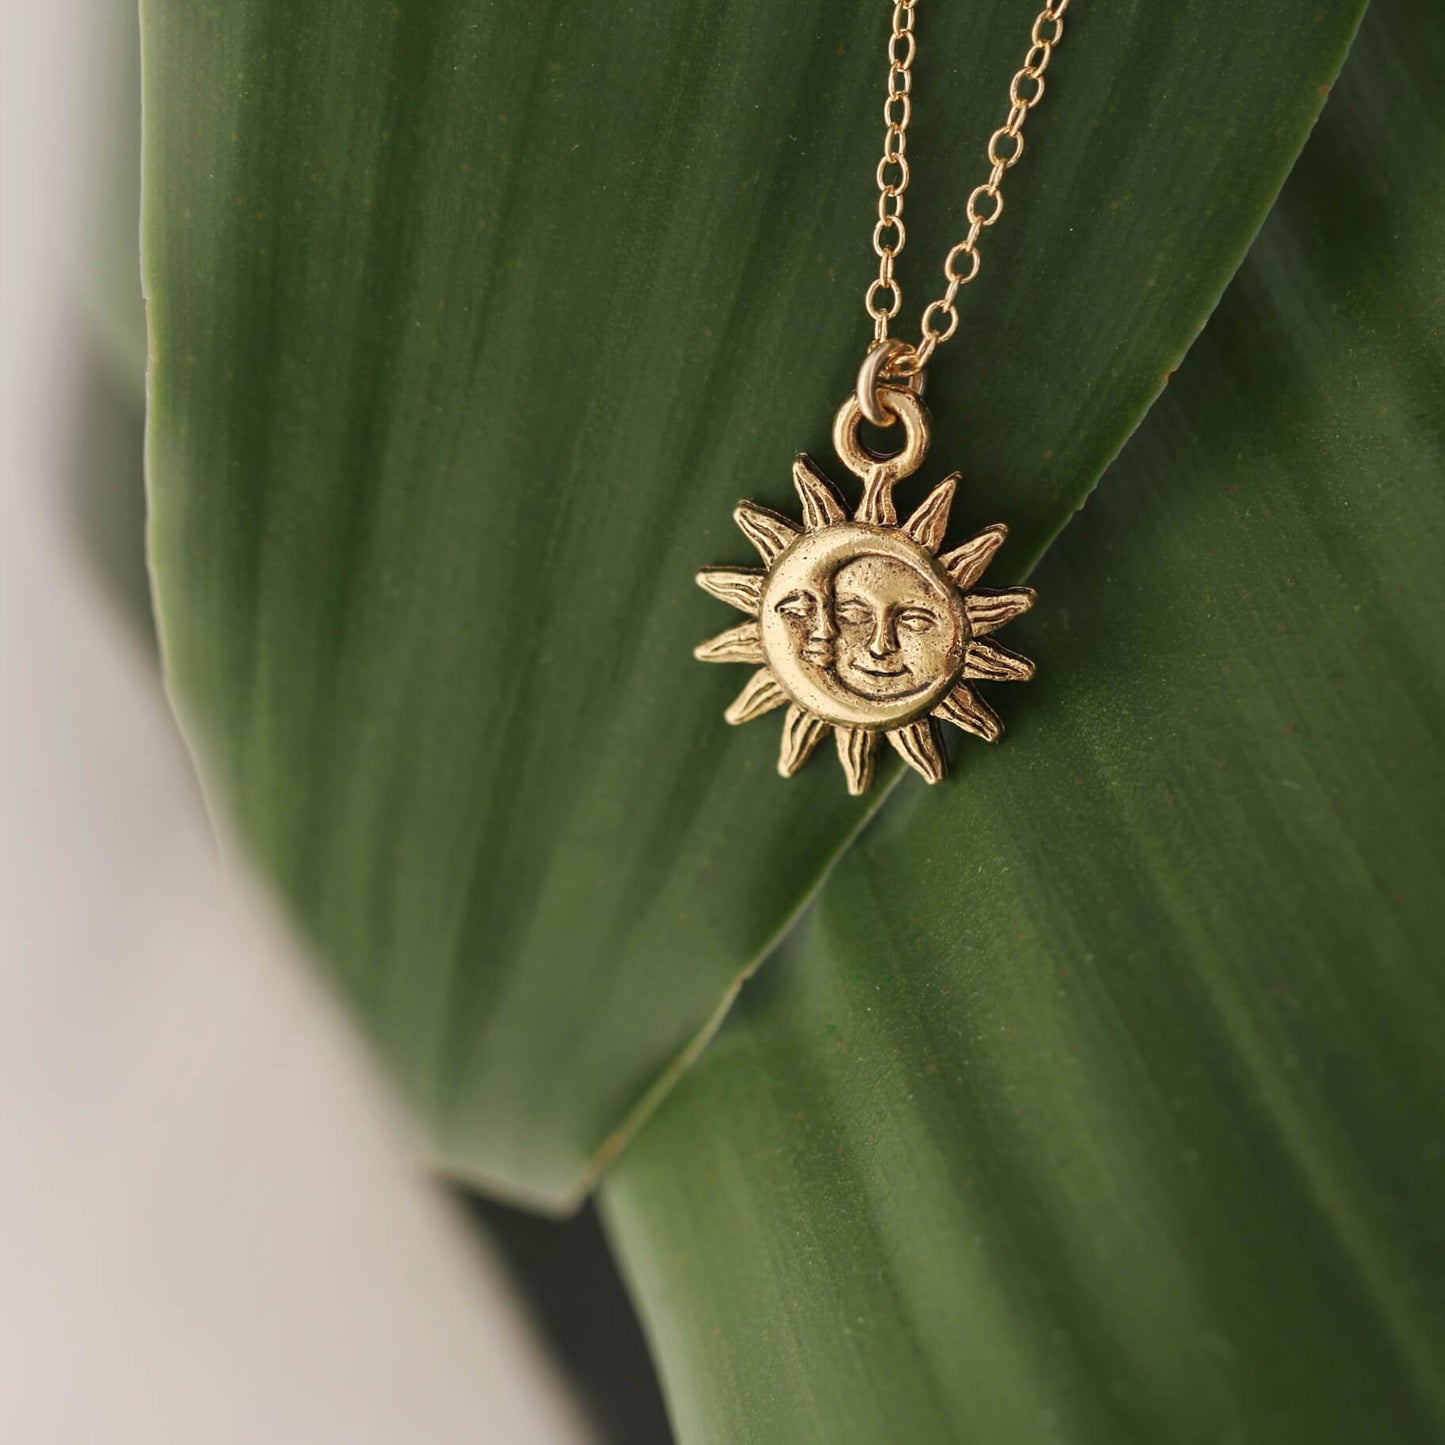 Detailed view of 14k Gold Filled Light After Dark Necklace with Gold Sun Moon Charm.